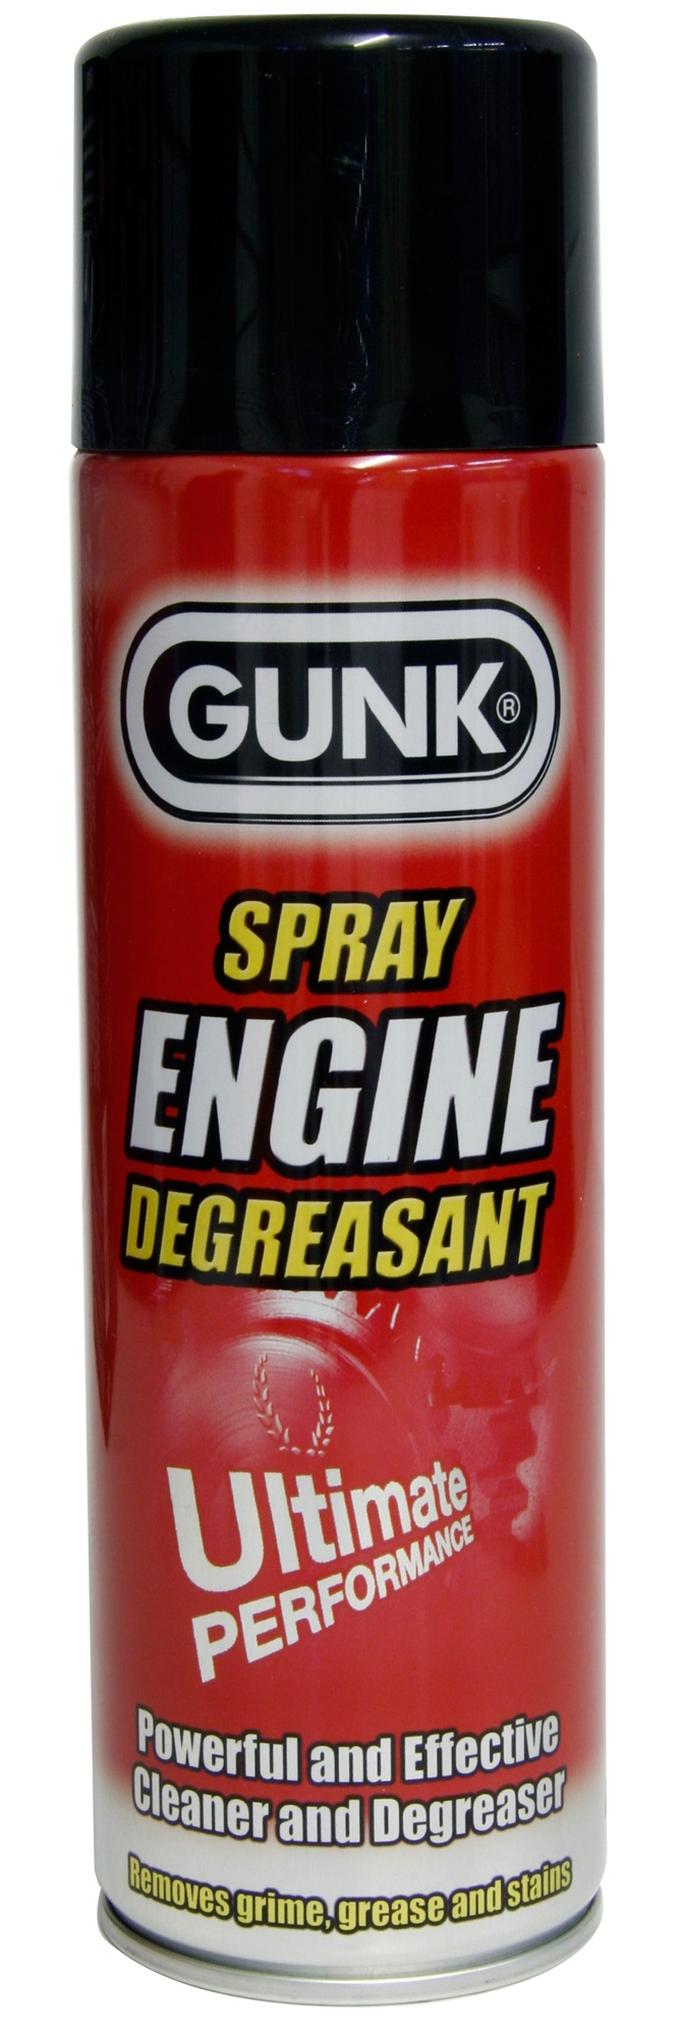 GUNK Engine Degreaser Can Safe, UNS Wholesale